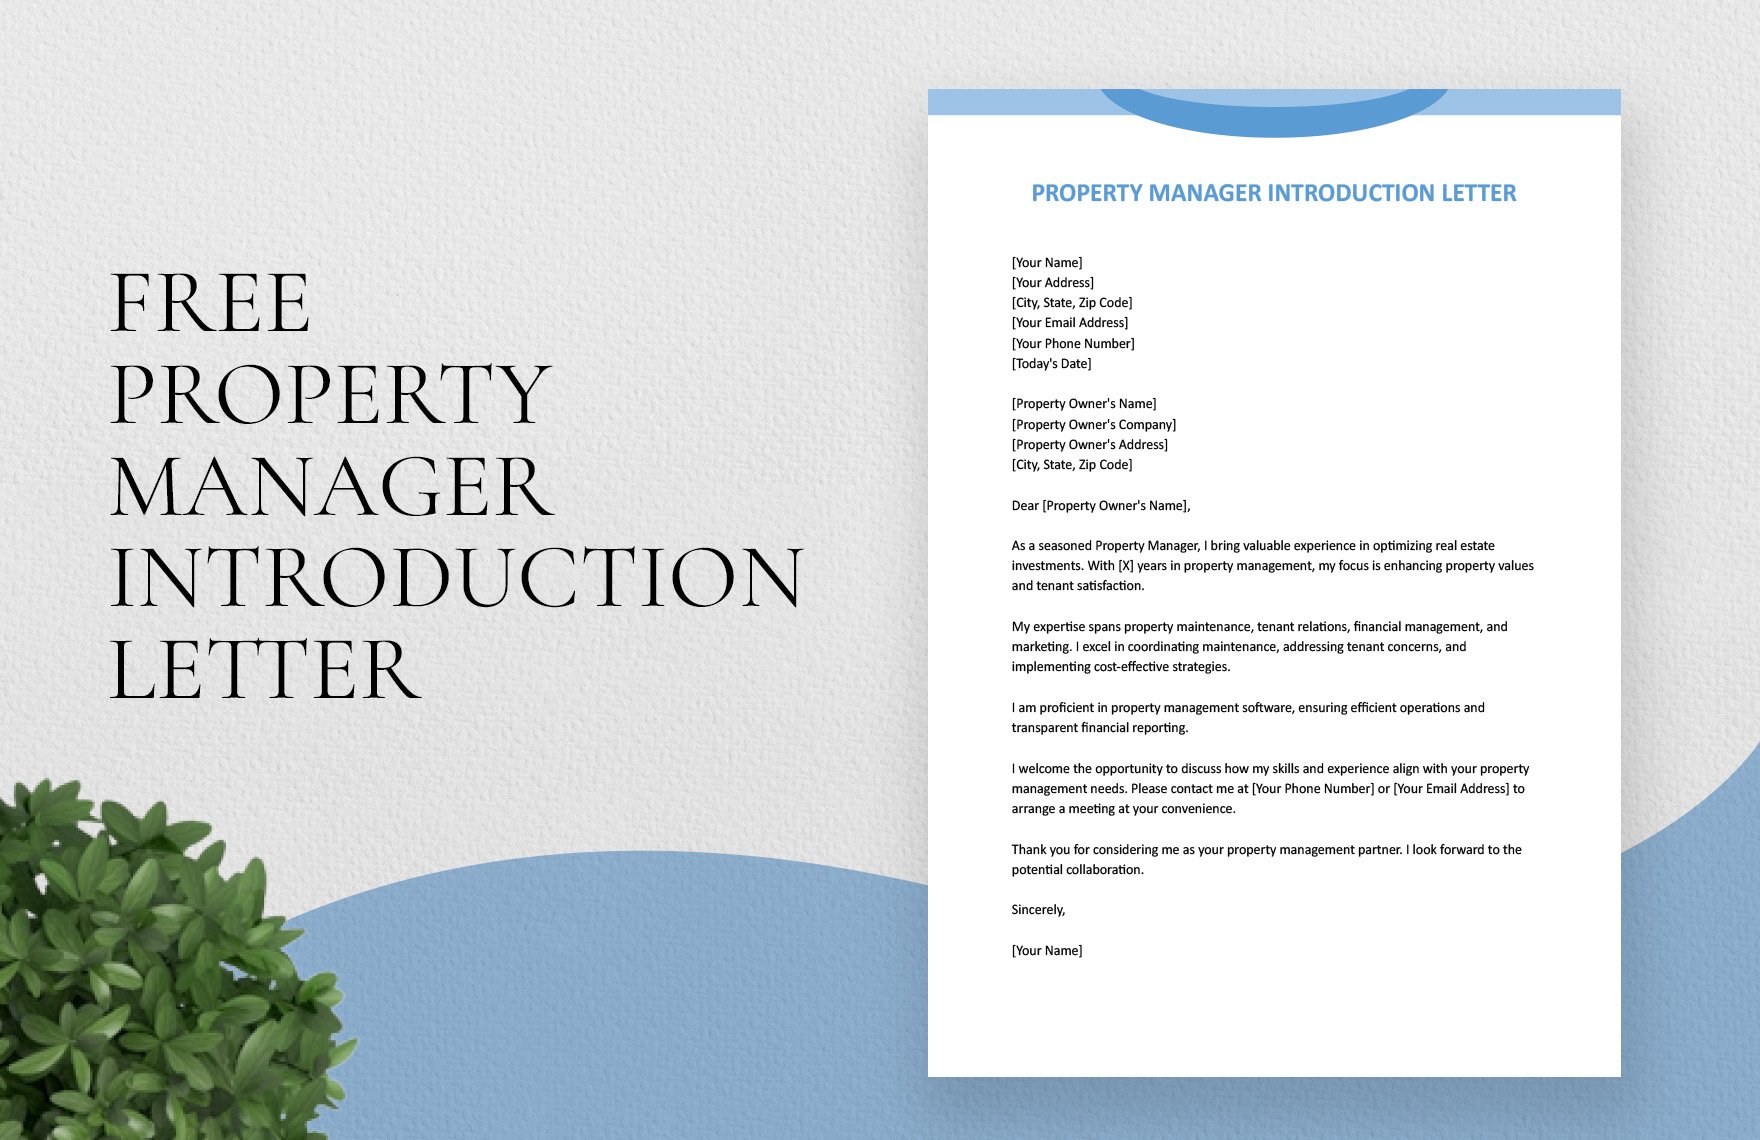 Property Manager Introduction Letter